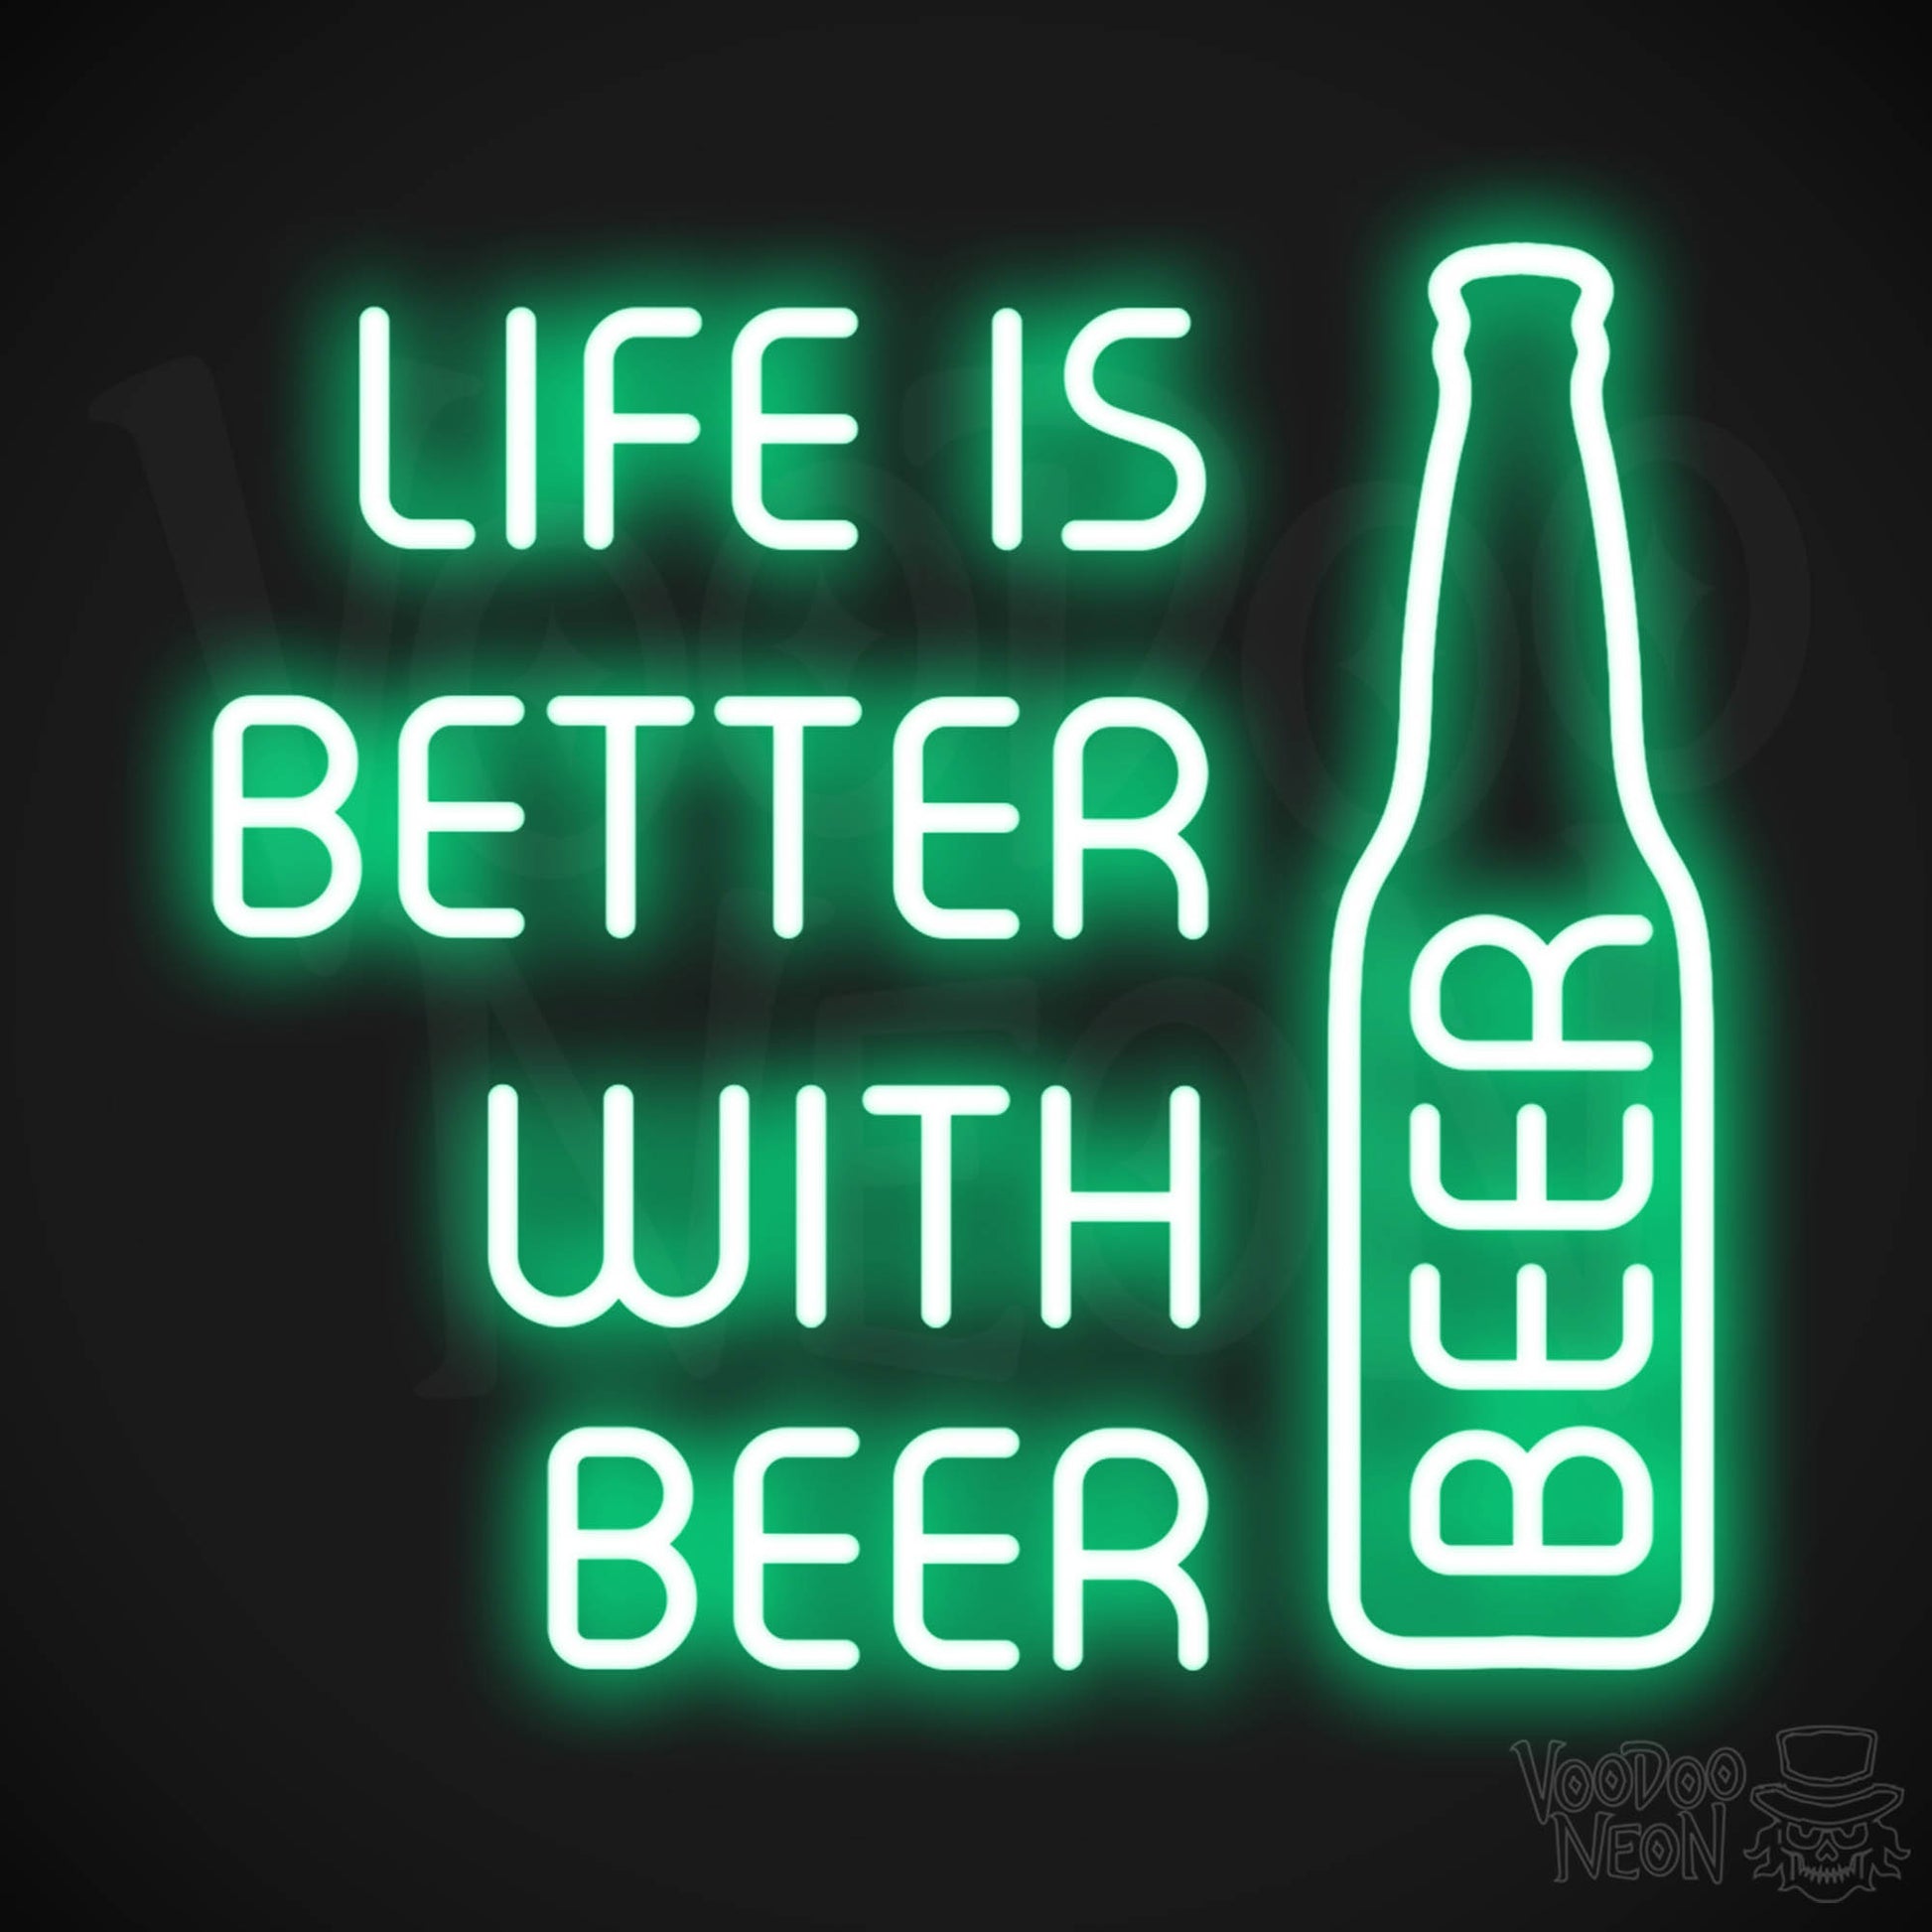 Life Is Better With Beer LED Neon - Green